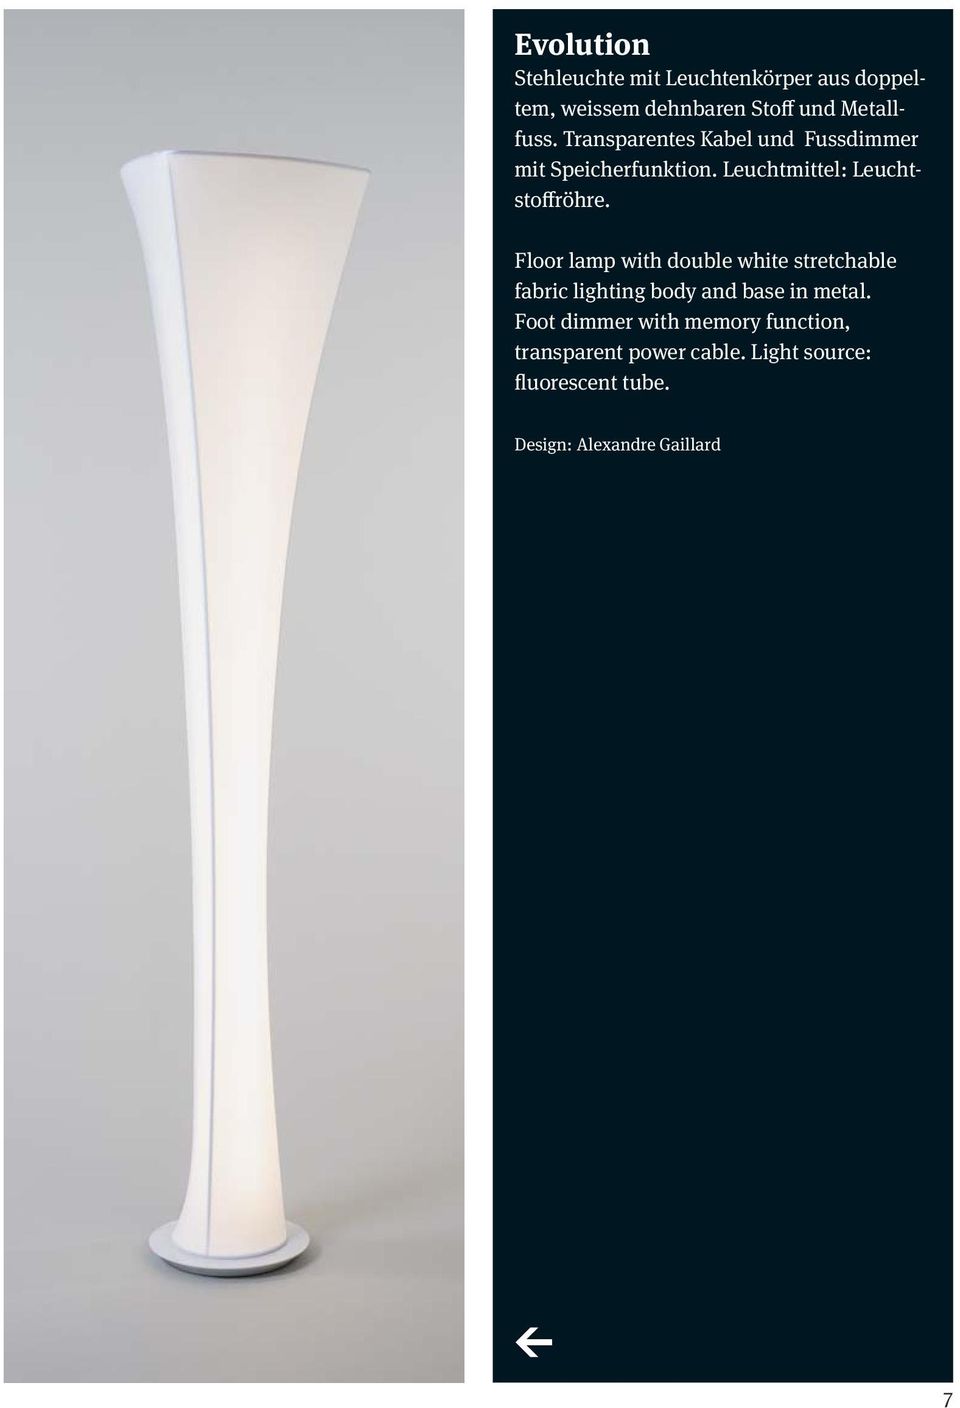 Floor lamp with double white stretchable fabric lighting body and base in metal.